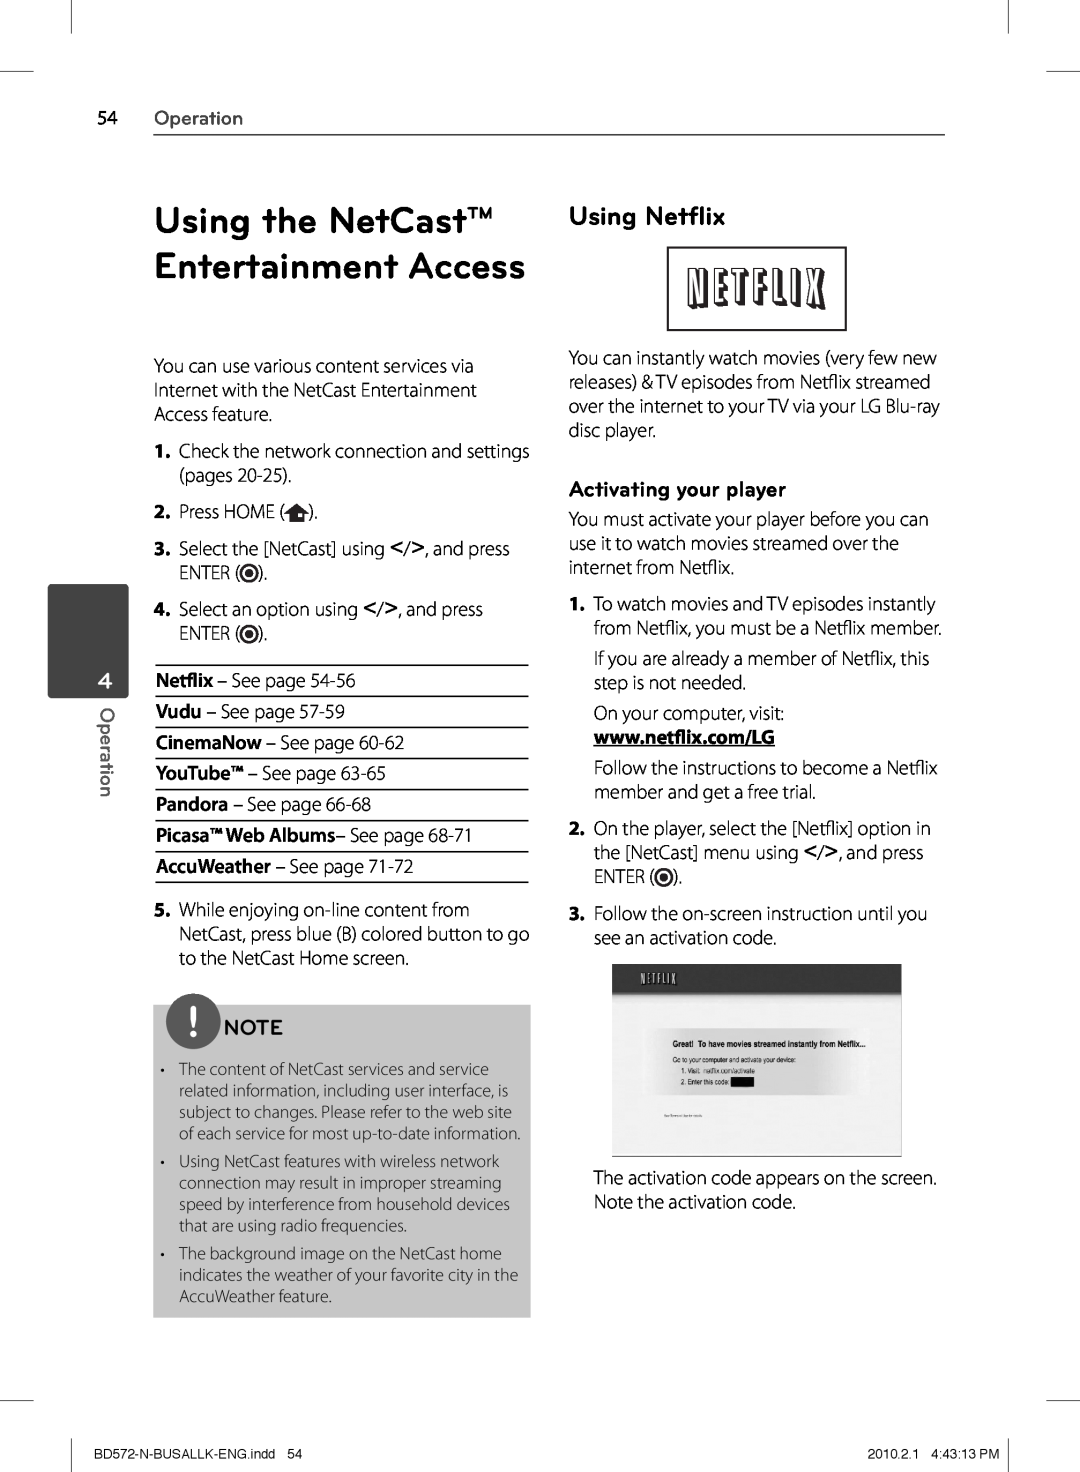 LG Electronics BD570 owner manual Using the NetCast Entertainment Access, Using Netﬂix, Activating your player, Operation 